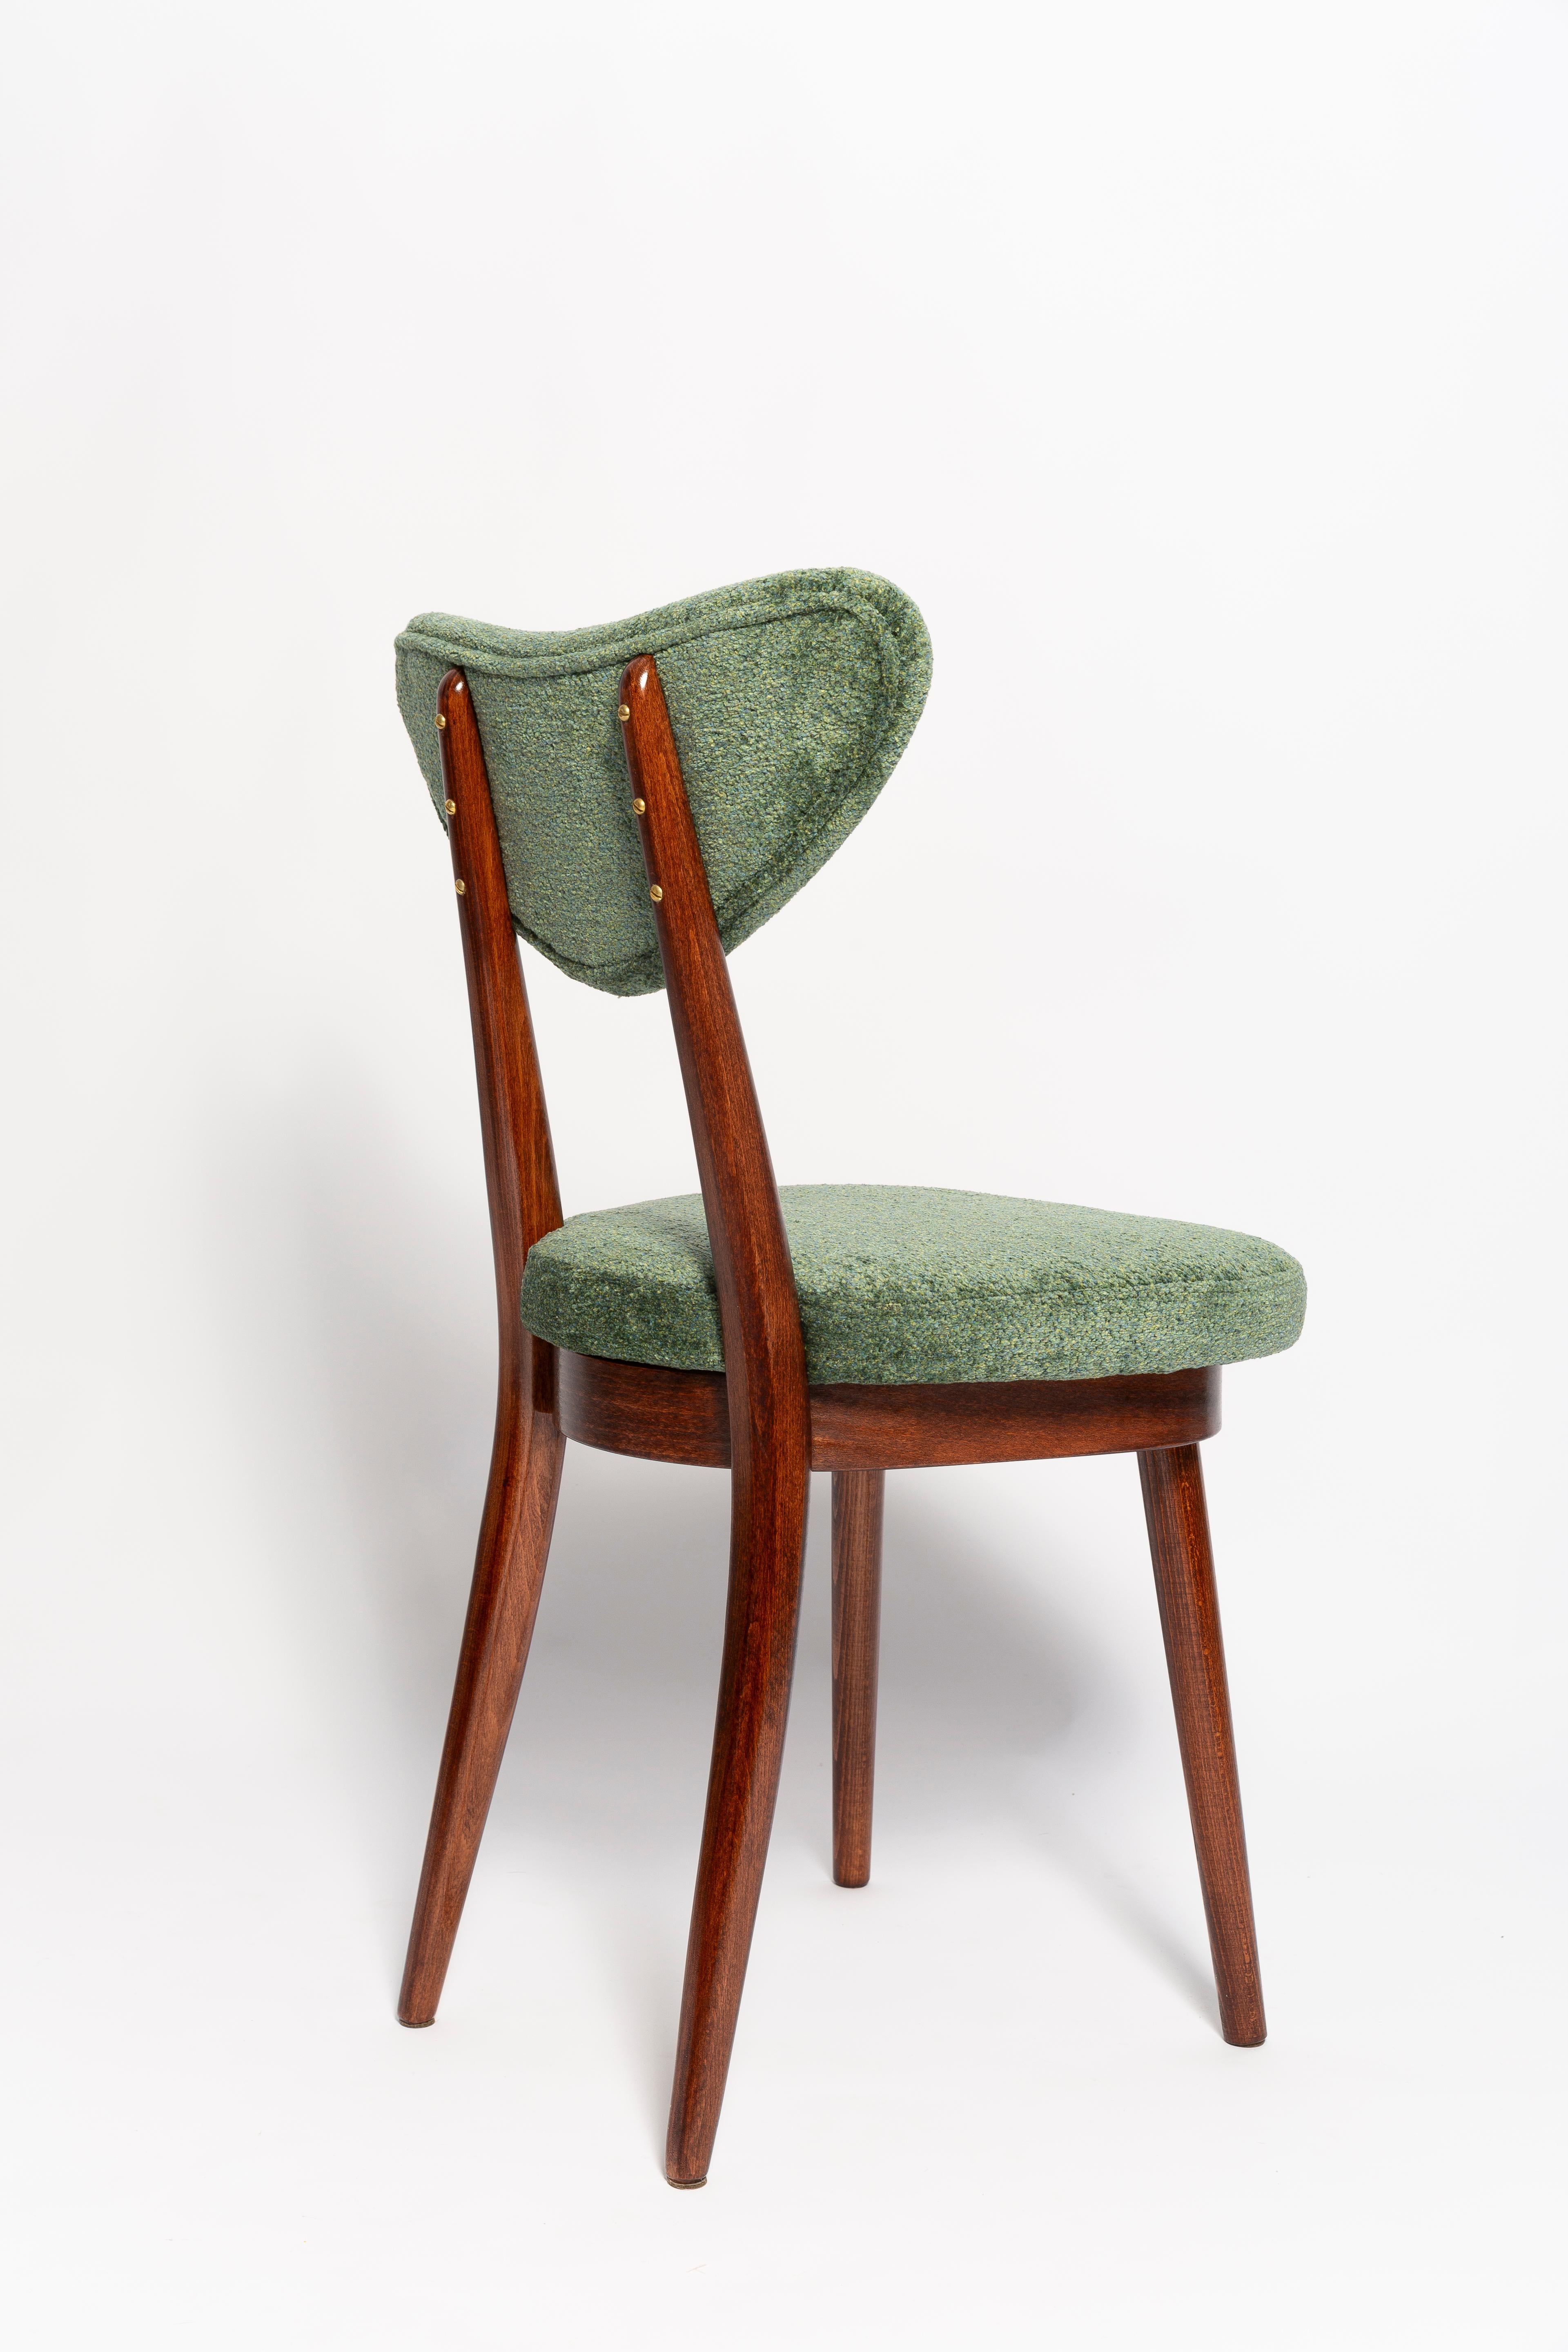 Hand-Crafted Mid Century Heart Chair and Stool, Green Velvet, Dark Wood, Europe 1960s For Sale